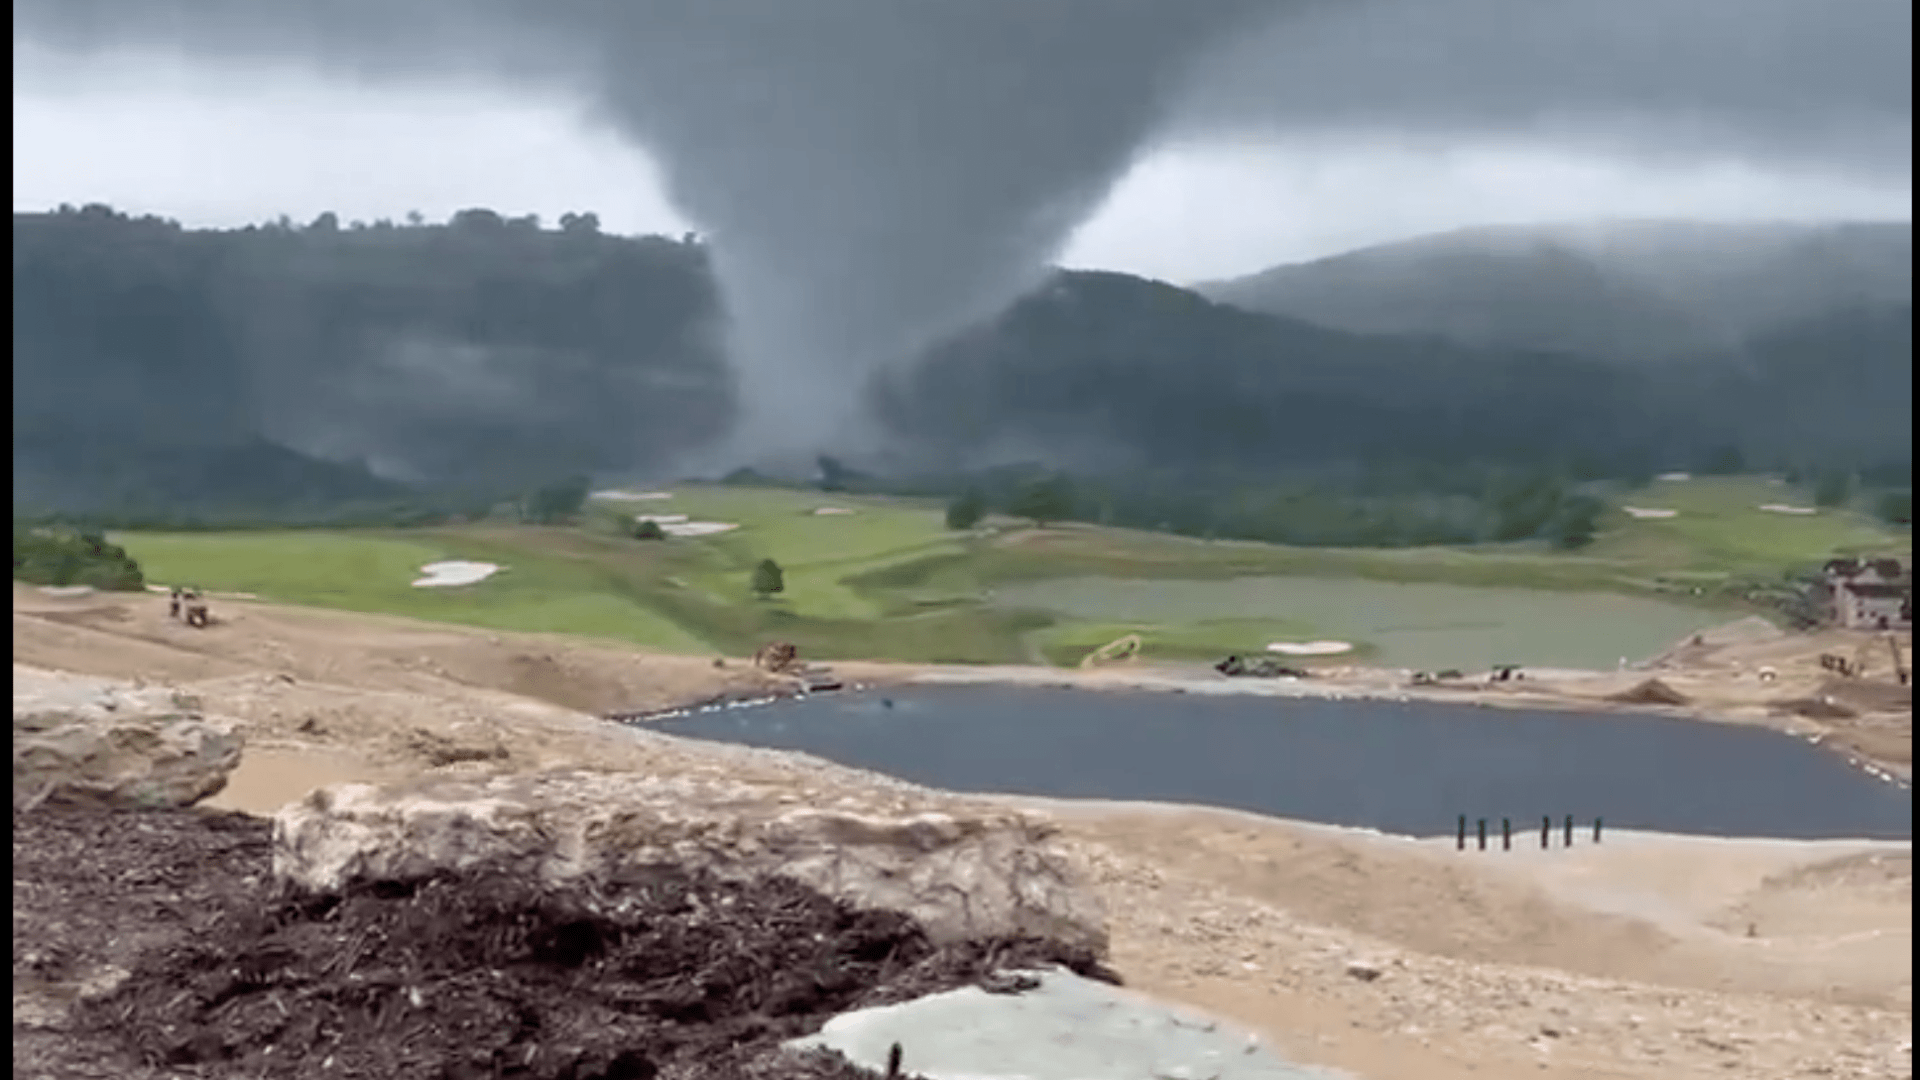 Watch huge tornado rip through Tiger Woods golf course as daredevils risk lives